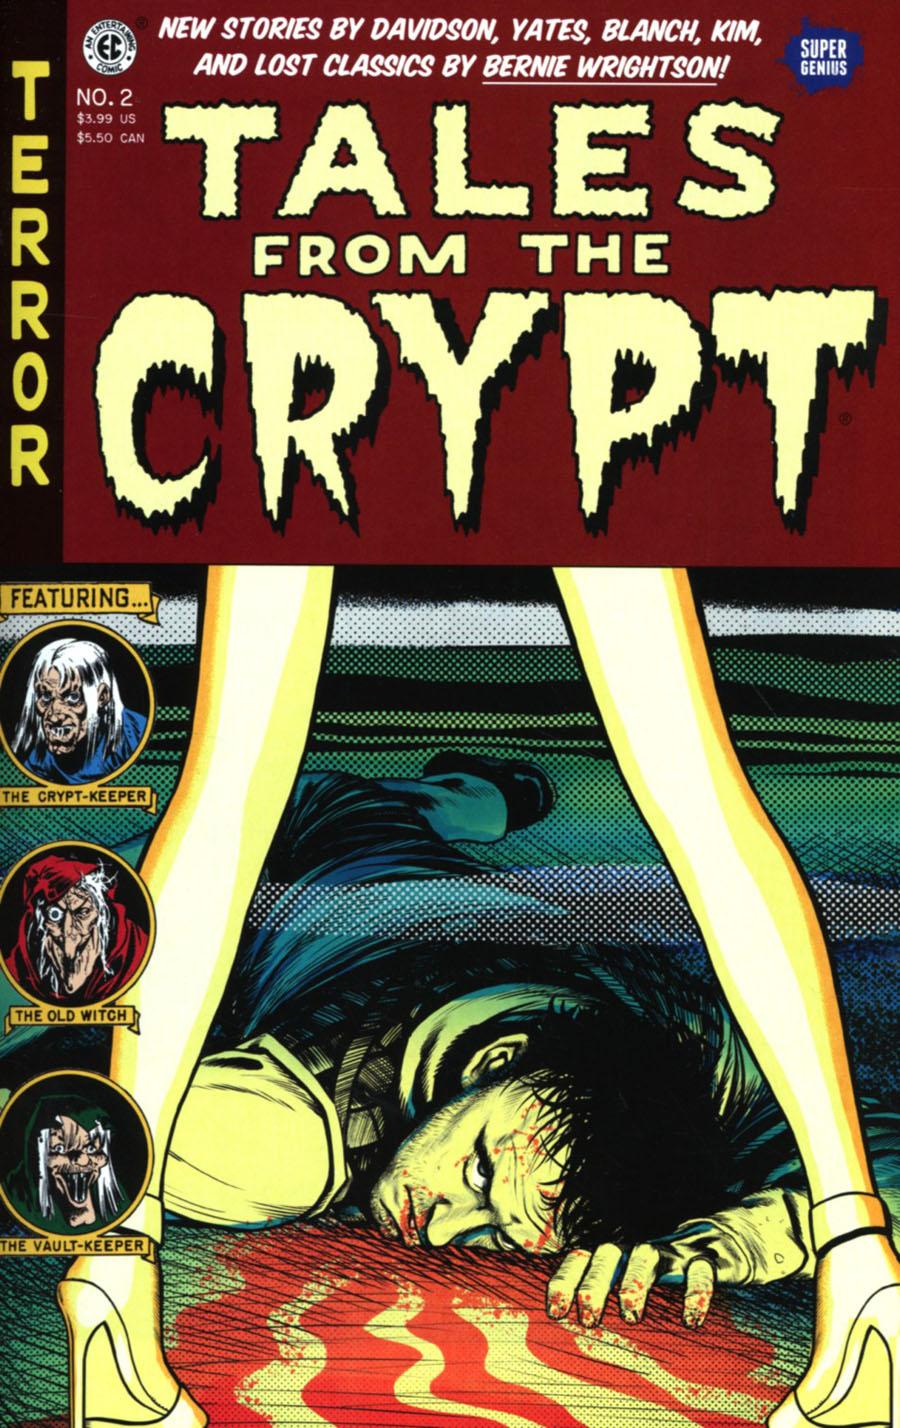 Tales From The Crypt Vol. 3 #2